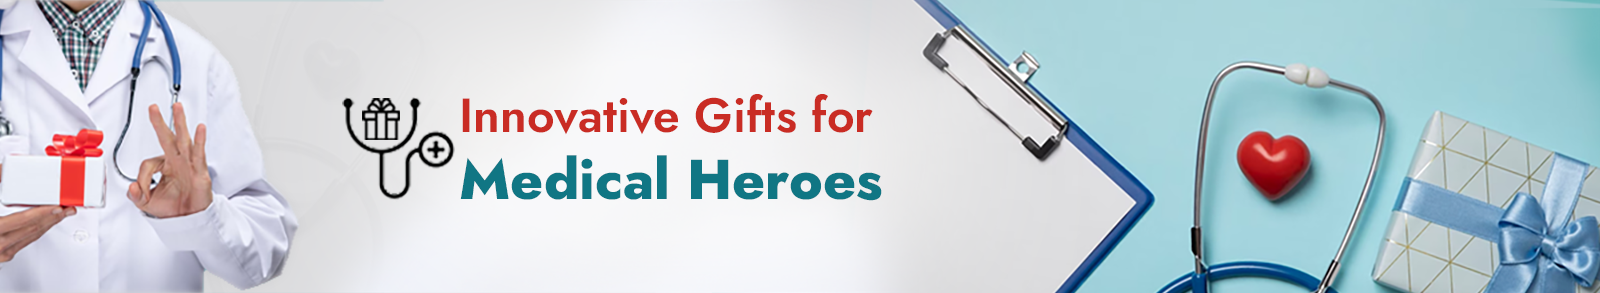 Innovative Gifts for Medical Heroes_1600